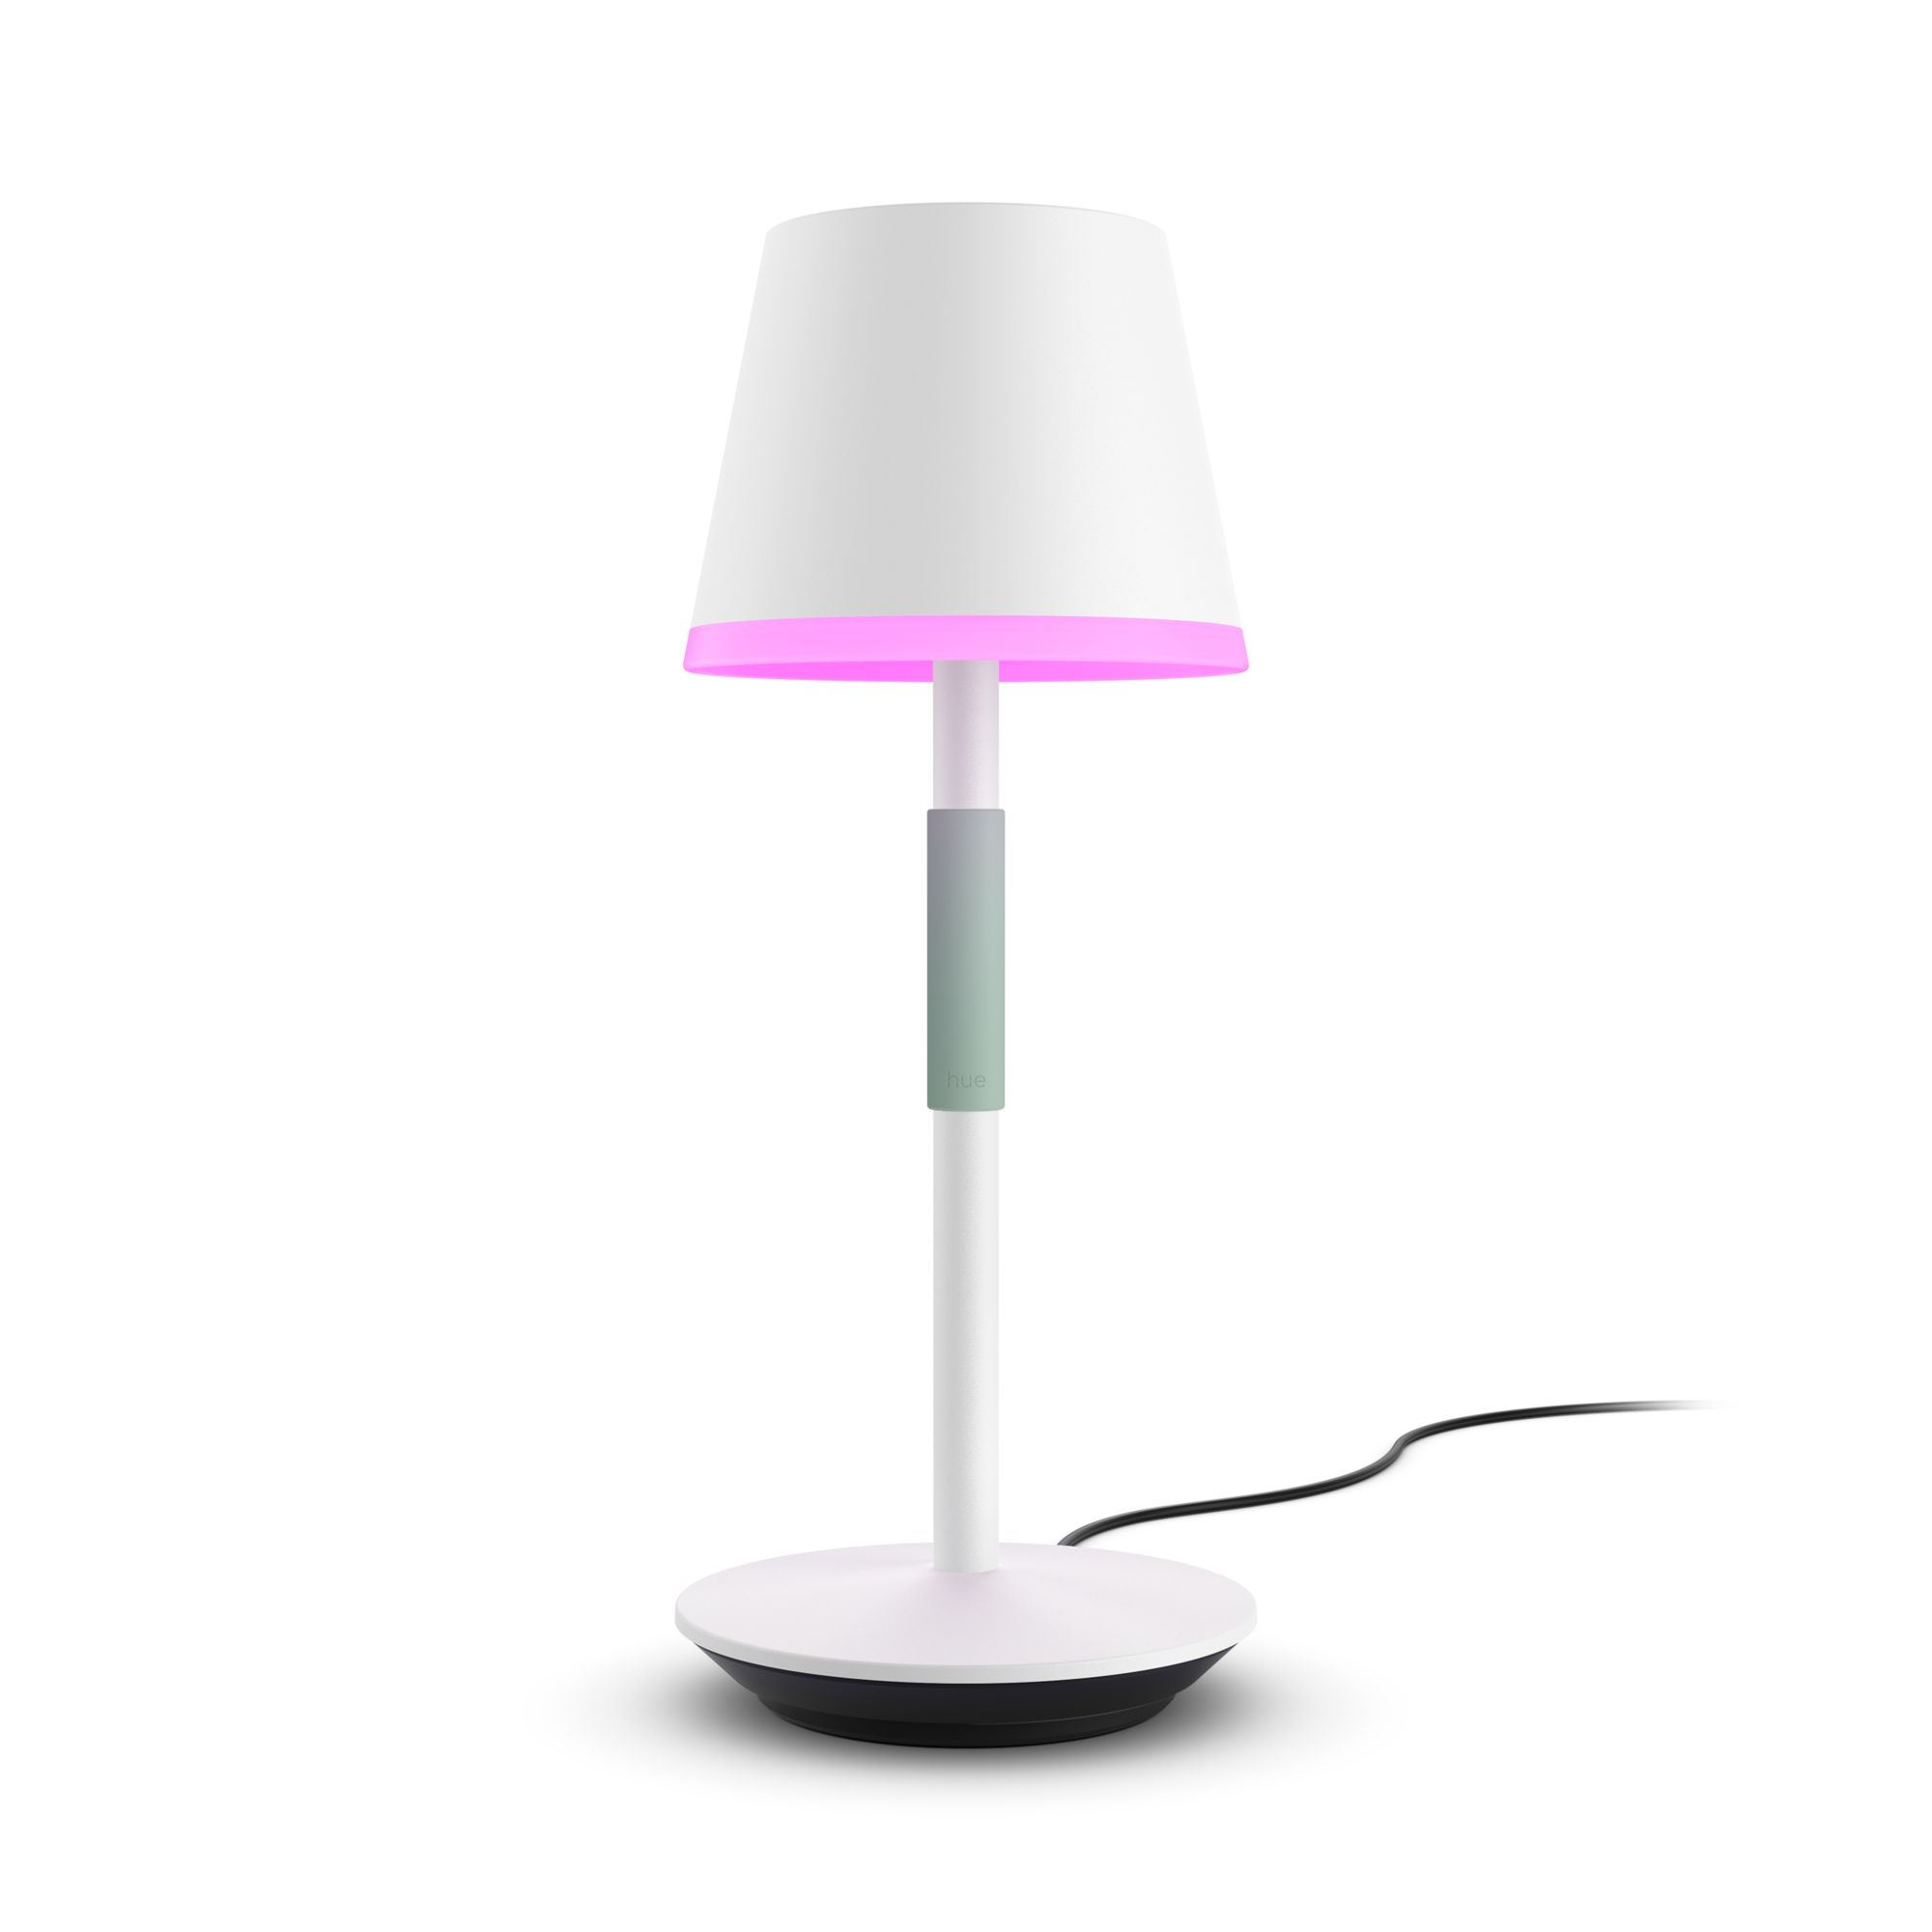 Philips by Signify Hue Go draagbare tafellamp